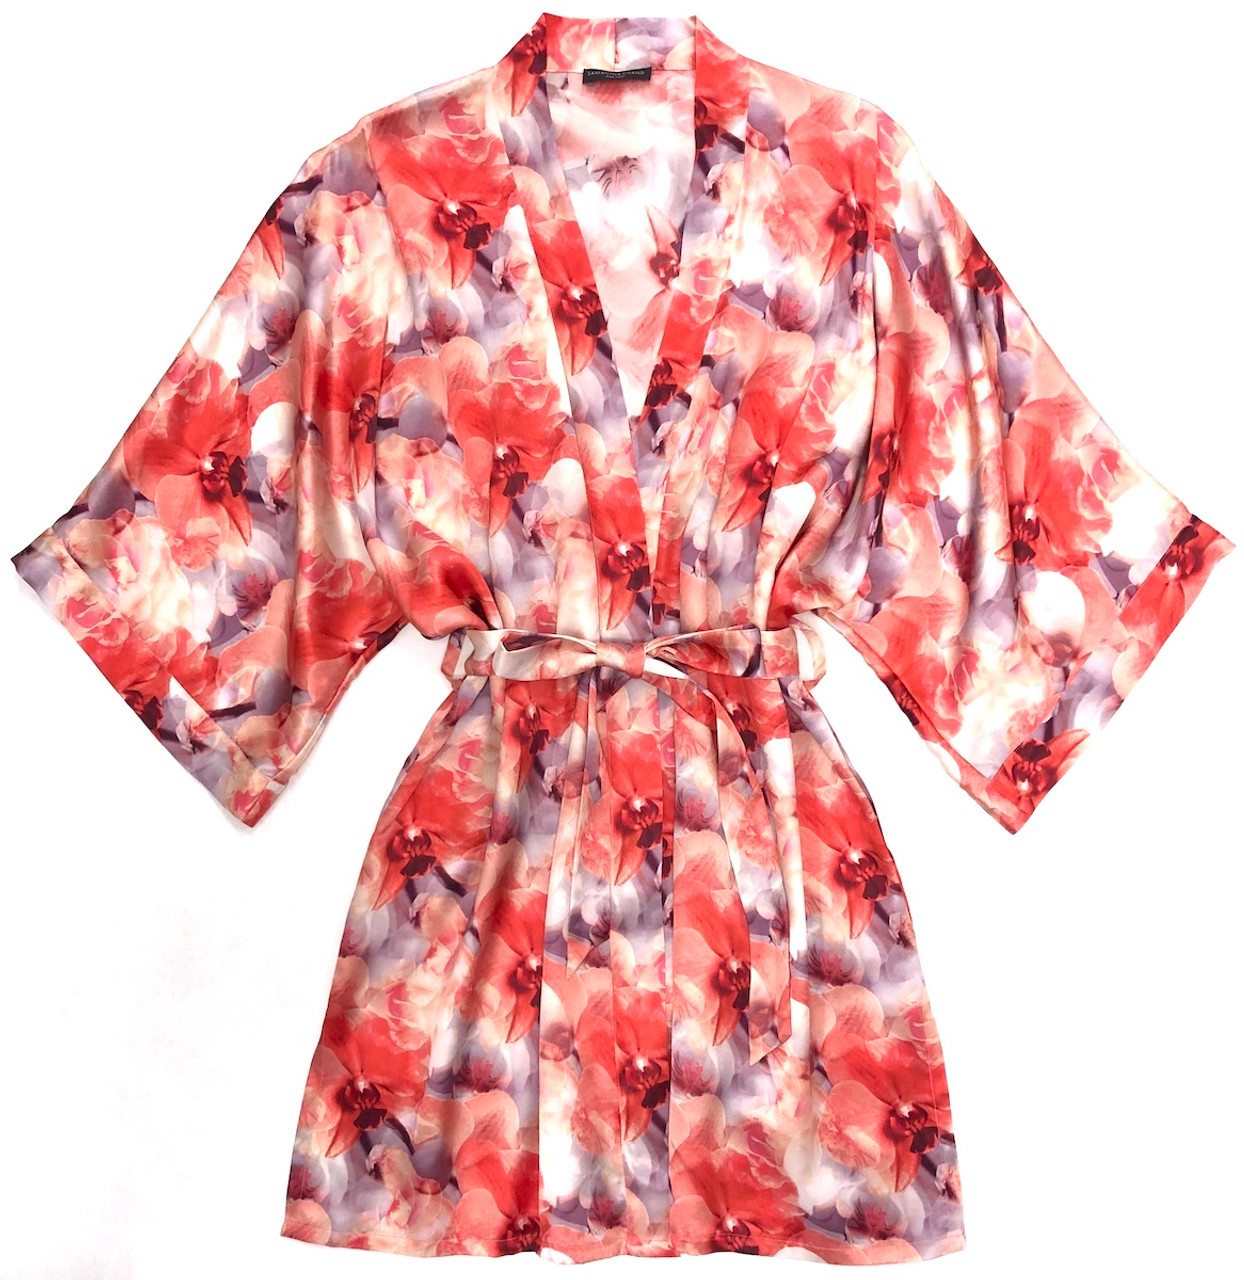 Generic Womens Sheer Kimono Robe Sexy Floral Print Chiffon Short Robes  Chiffon Bath Lingerie With Belt Red,One Size at Amazon Women's Clothing  store